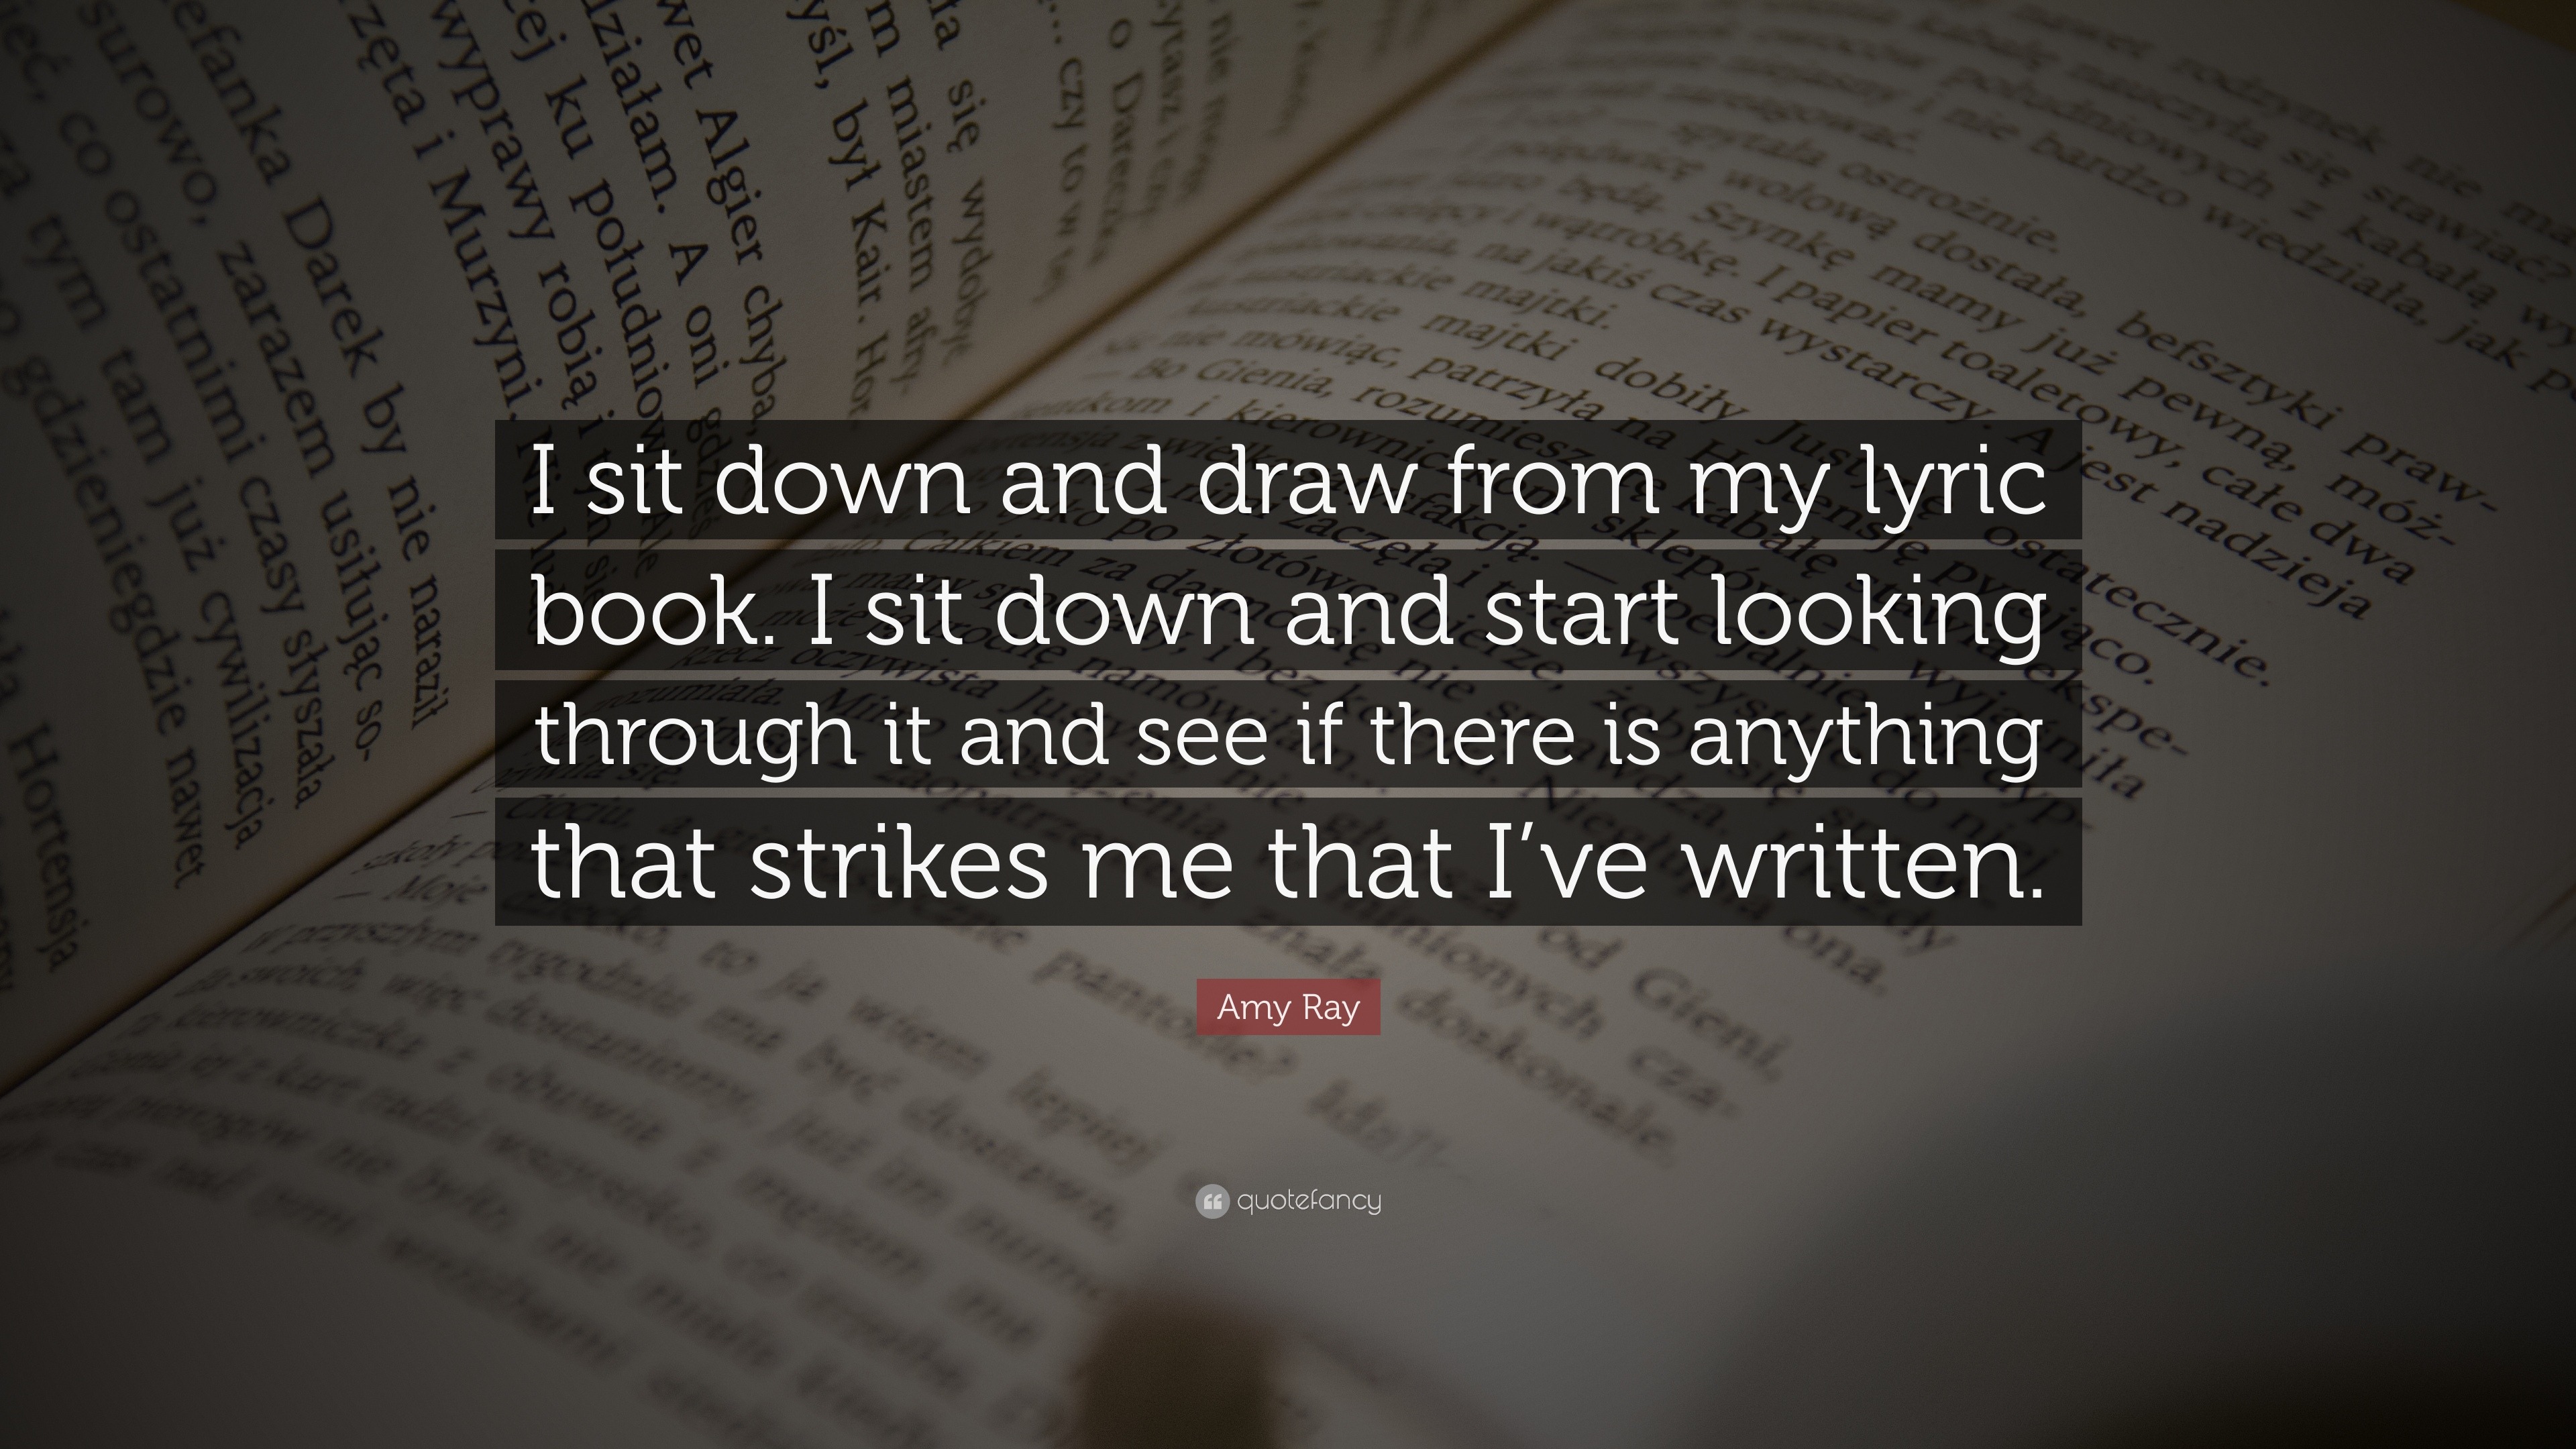 Amy Ray Quote: "I sit down and draw from my lyric book. I sit down and start looking through it ...